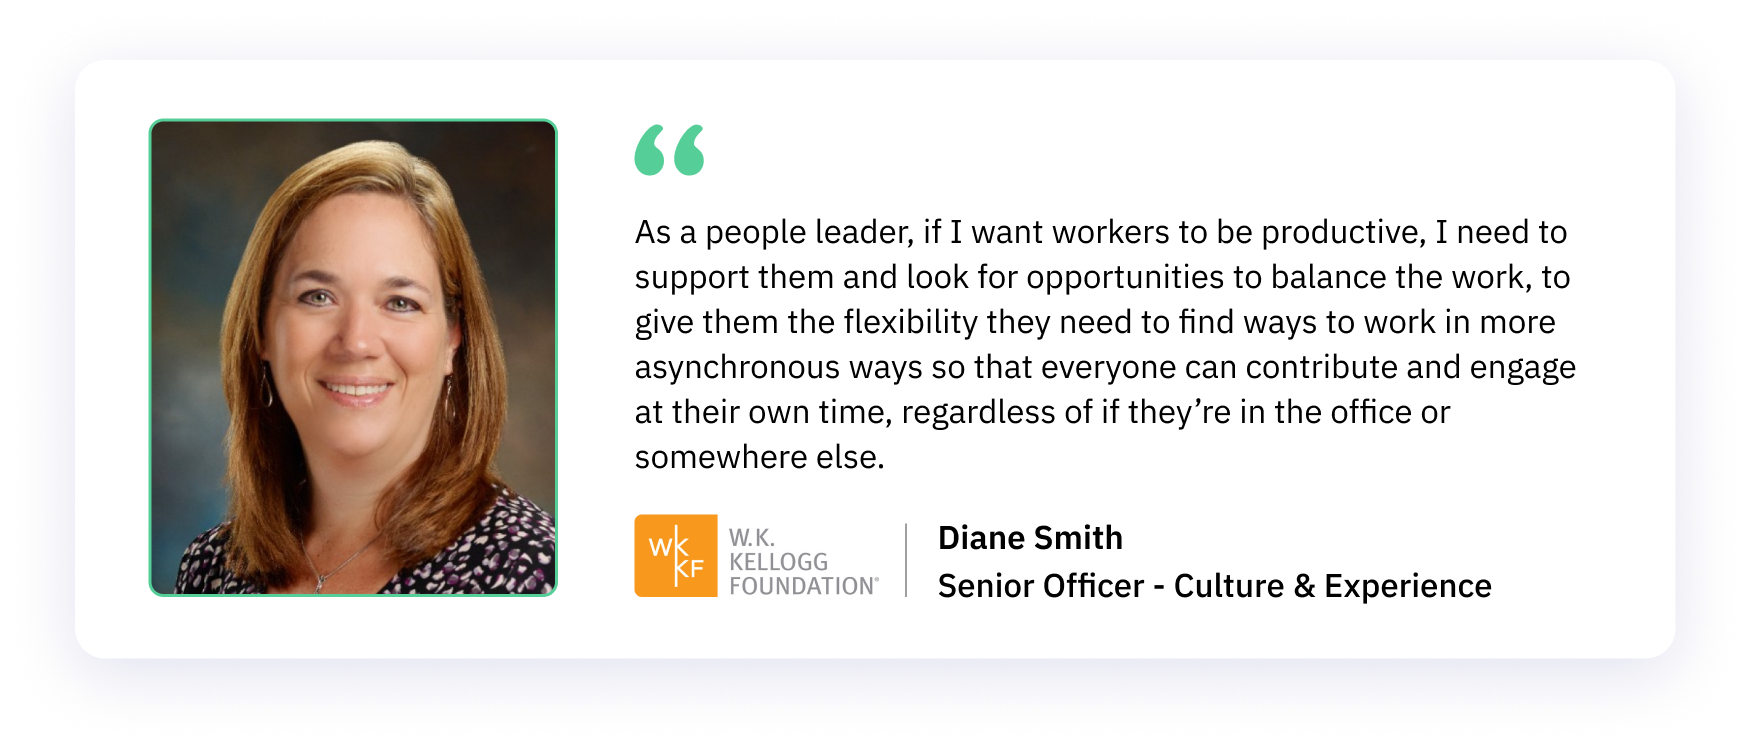 Diane Smith, Senior Office - Culture & Experience